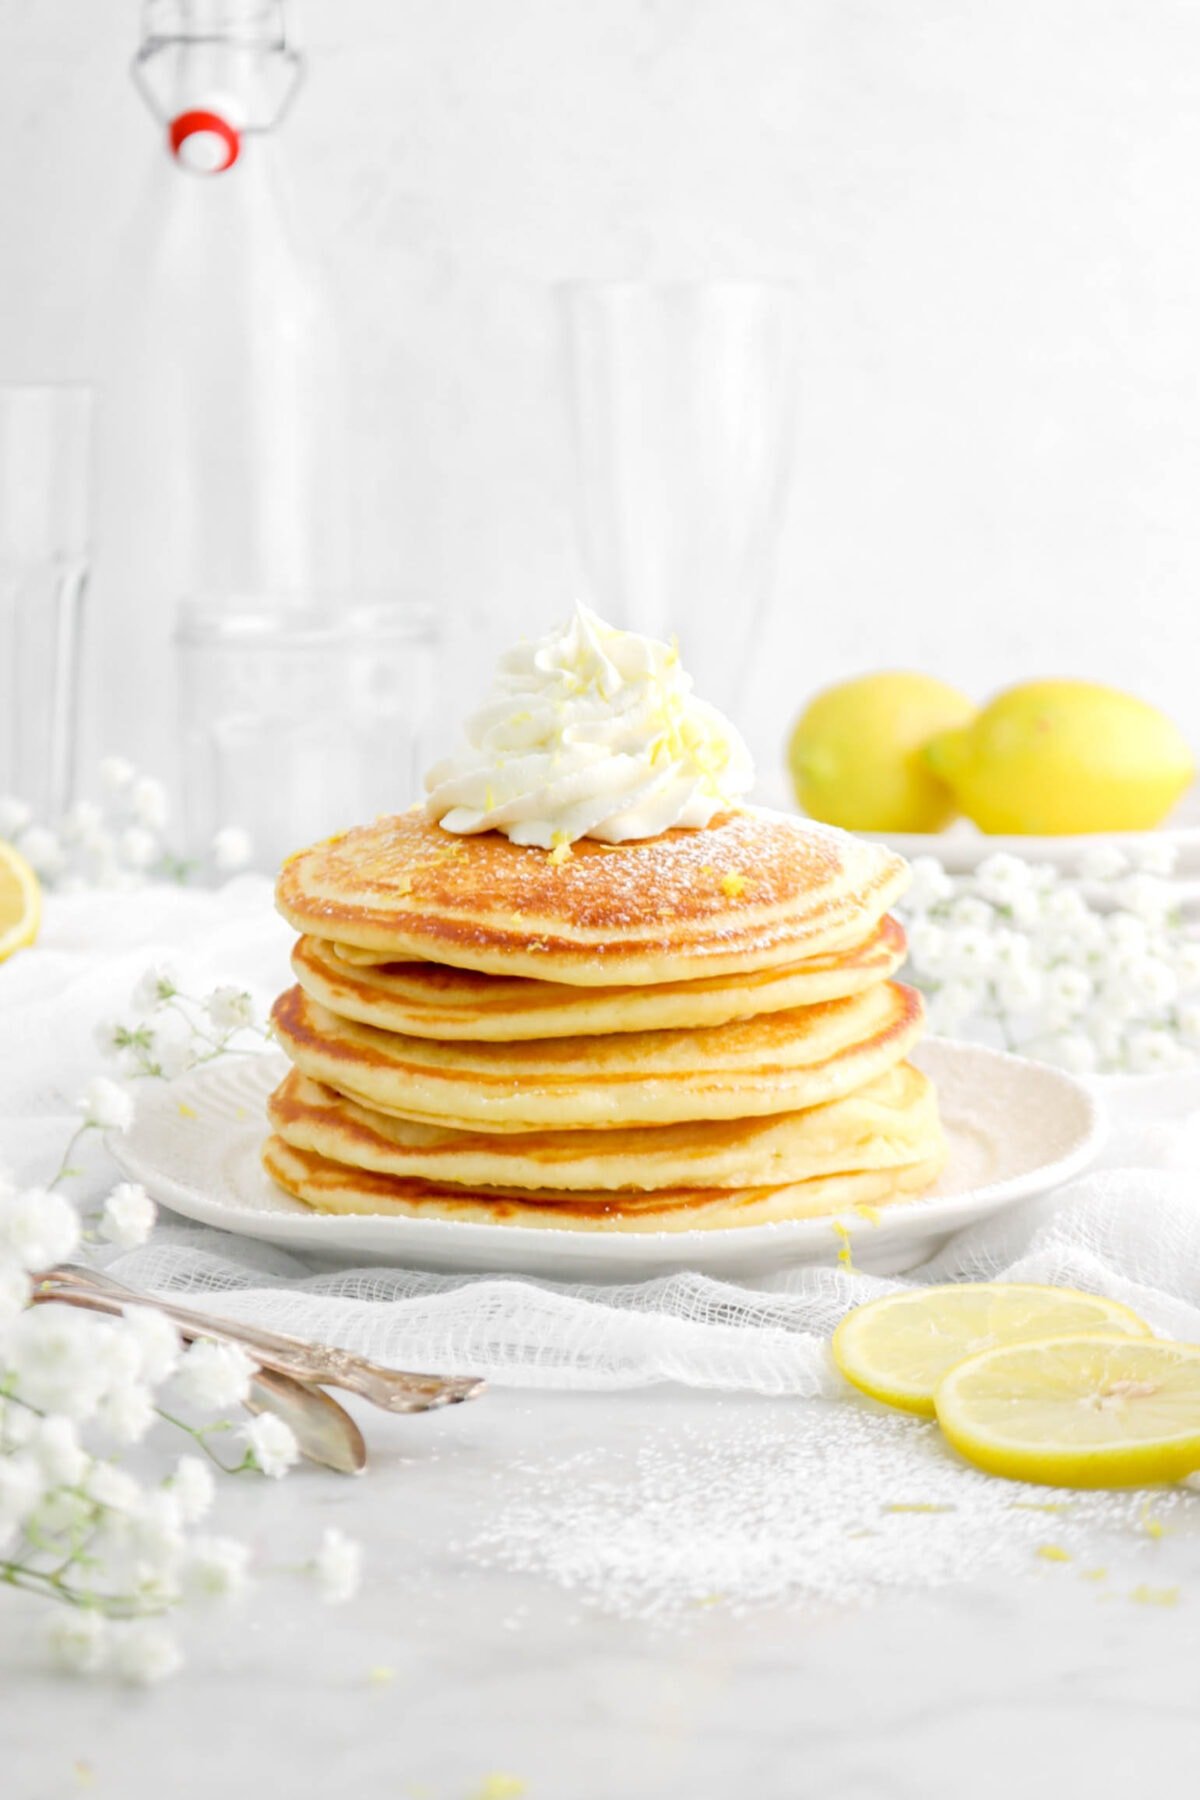 five stacked pancakes on white plate with flowers around, lemon zest, piped whipped cream, and powdered sugar on top of pancakes with two whole lemons behind